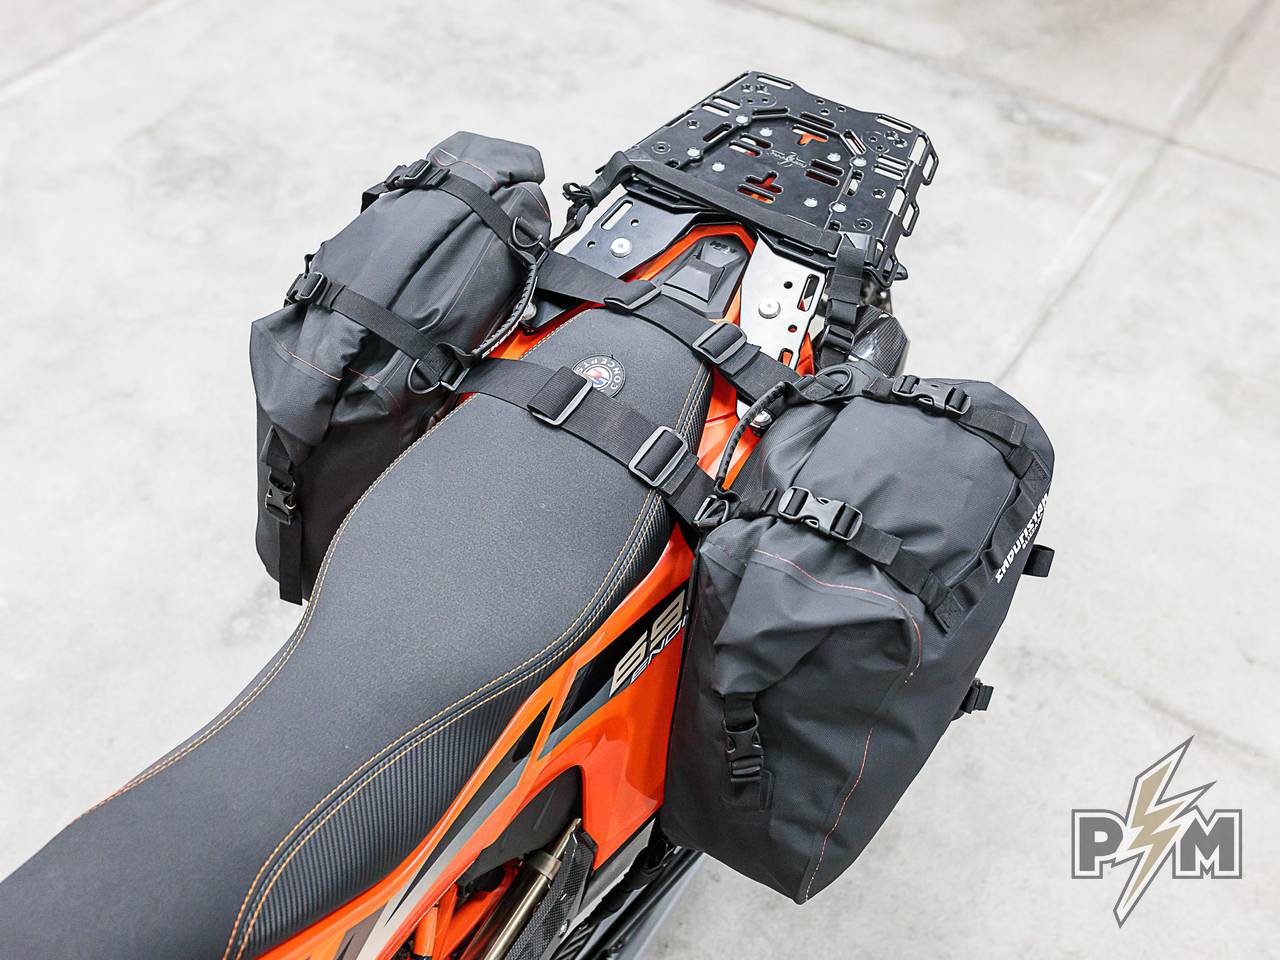 Perun moto KTM 690 Luggage rack and Extension plate with Enduristan Blizzard XL